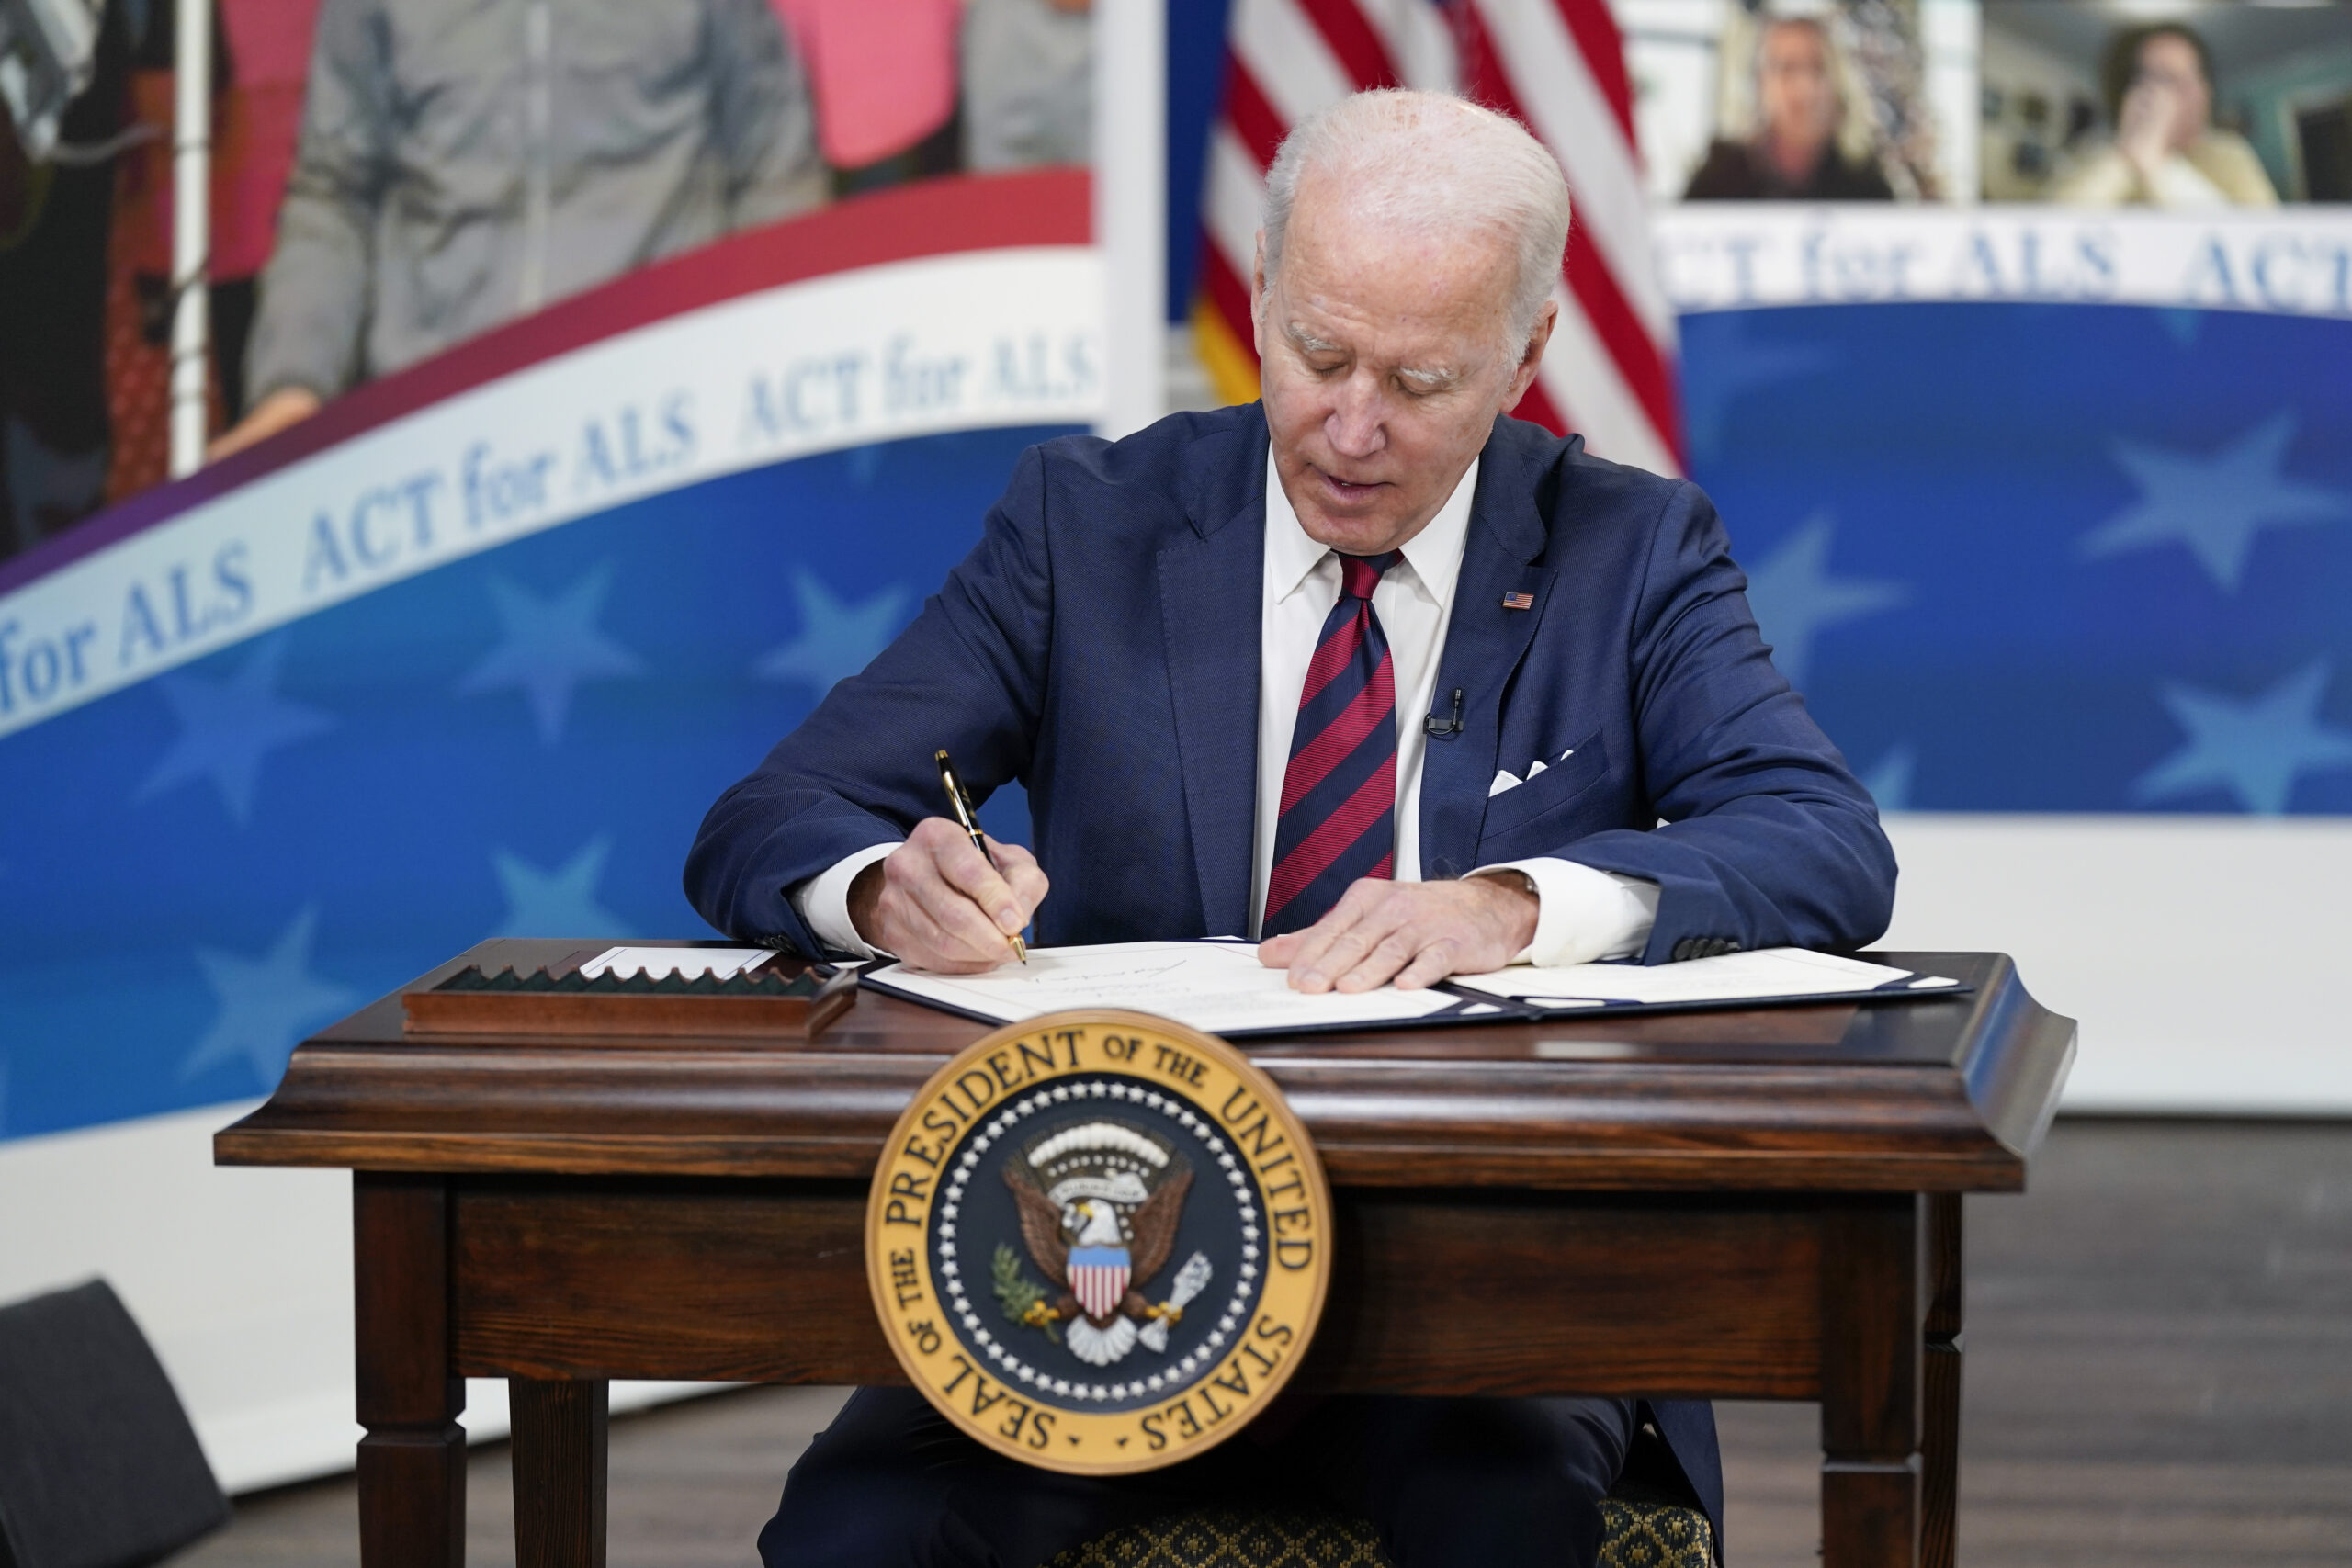 President Joe Biden signs the "Accelerating Access to Critical Therapies for ALS Act" into law during a ceremony in the South Court Auditorium on the White House campus in Washington, Thursday, Dec. 23, 2021. (AP Photo/Patrick Semansky)